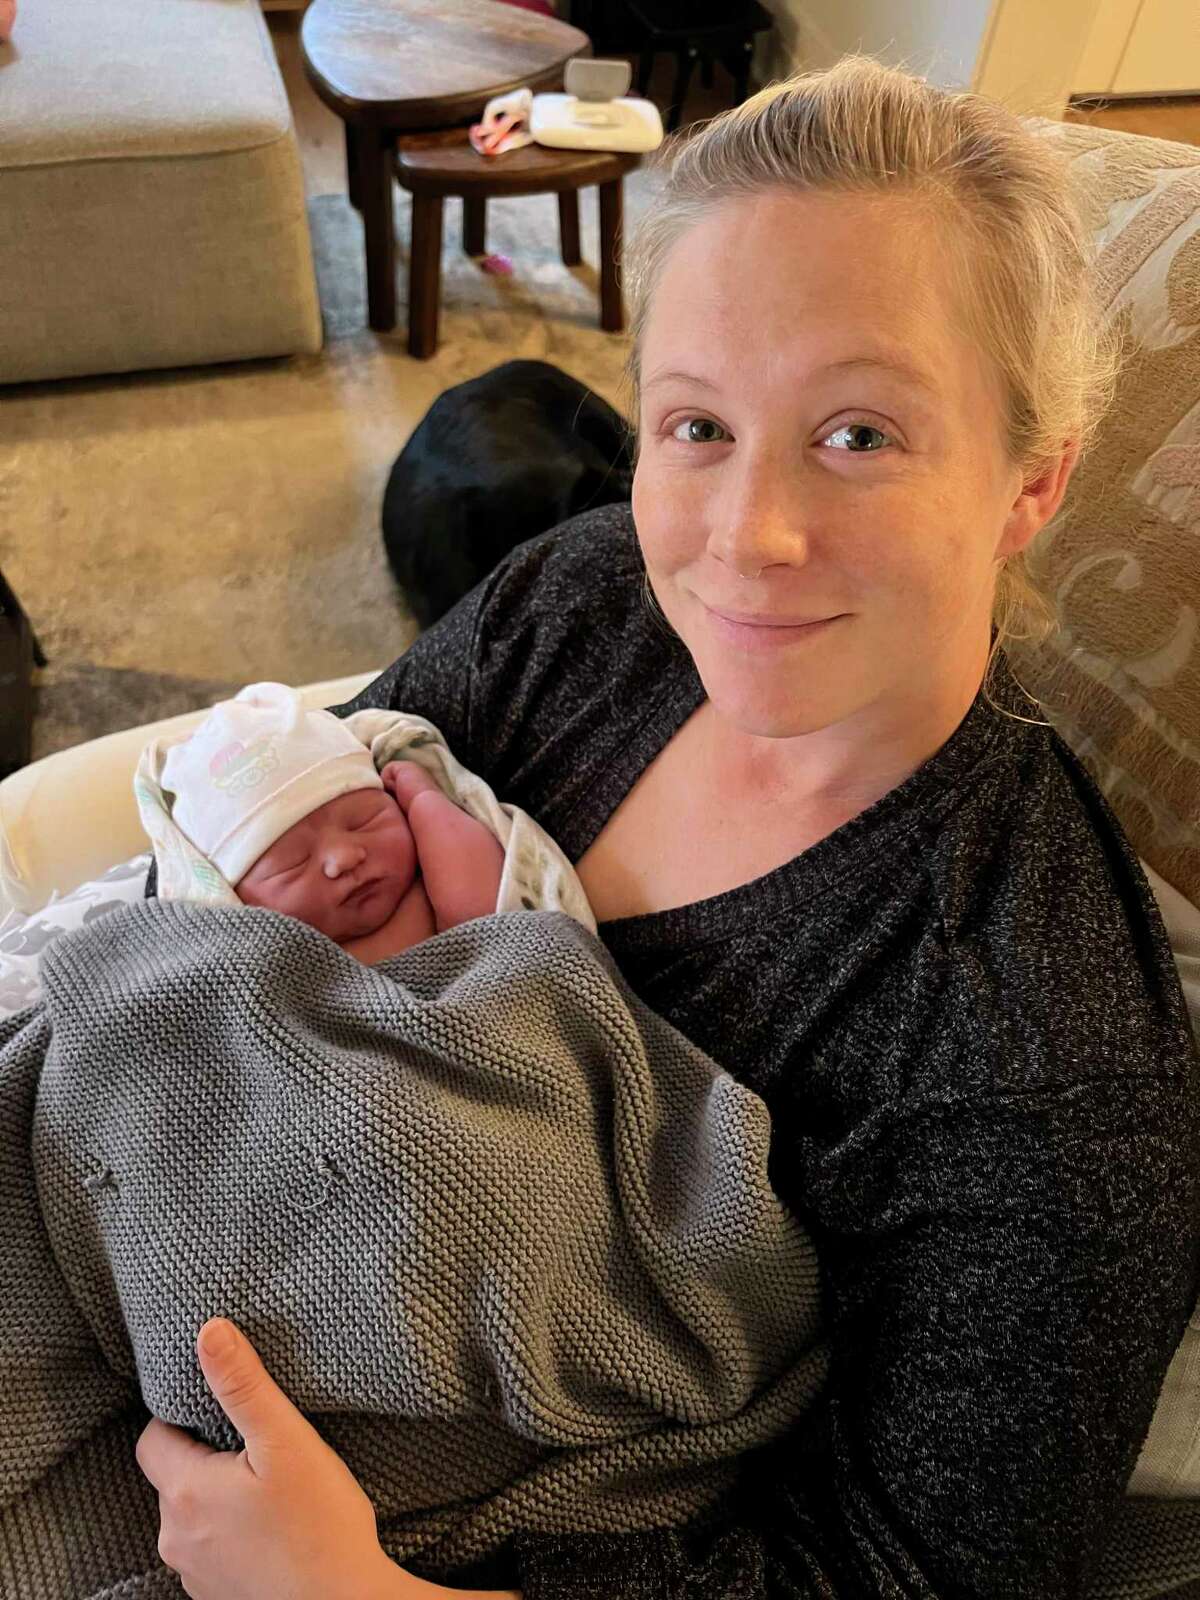 Courtney Morris and her new daughter Stella were doing well after Courtney gave birth at home using a birthing tub. A conscientious crew from the San Antonio Water System worked diligently to repair a water main to make the home birth possible.